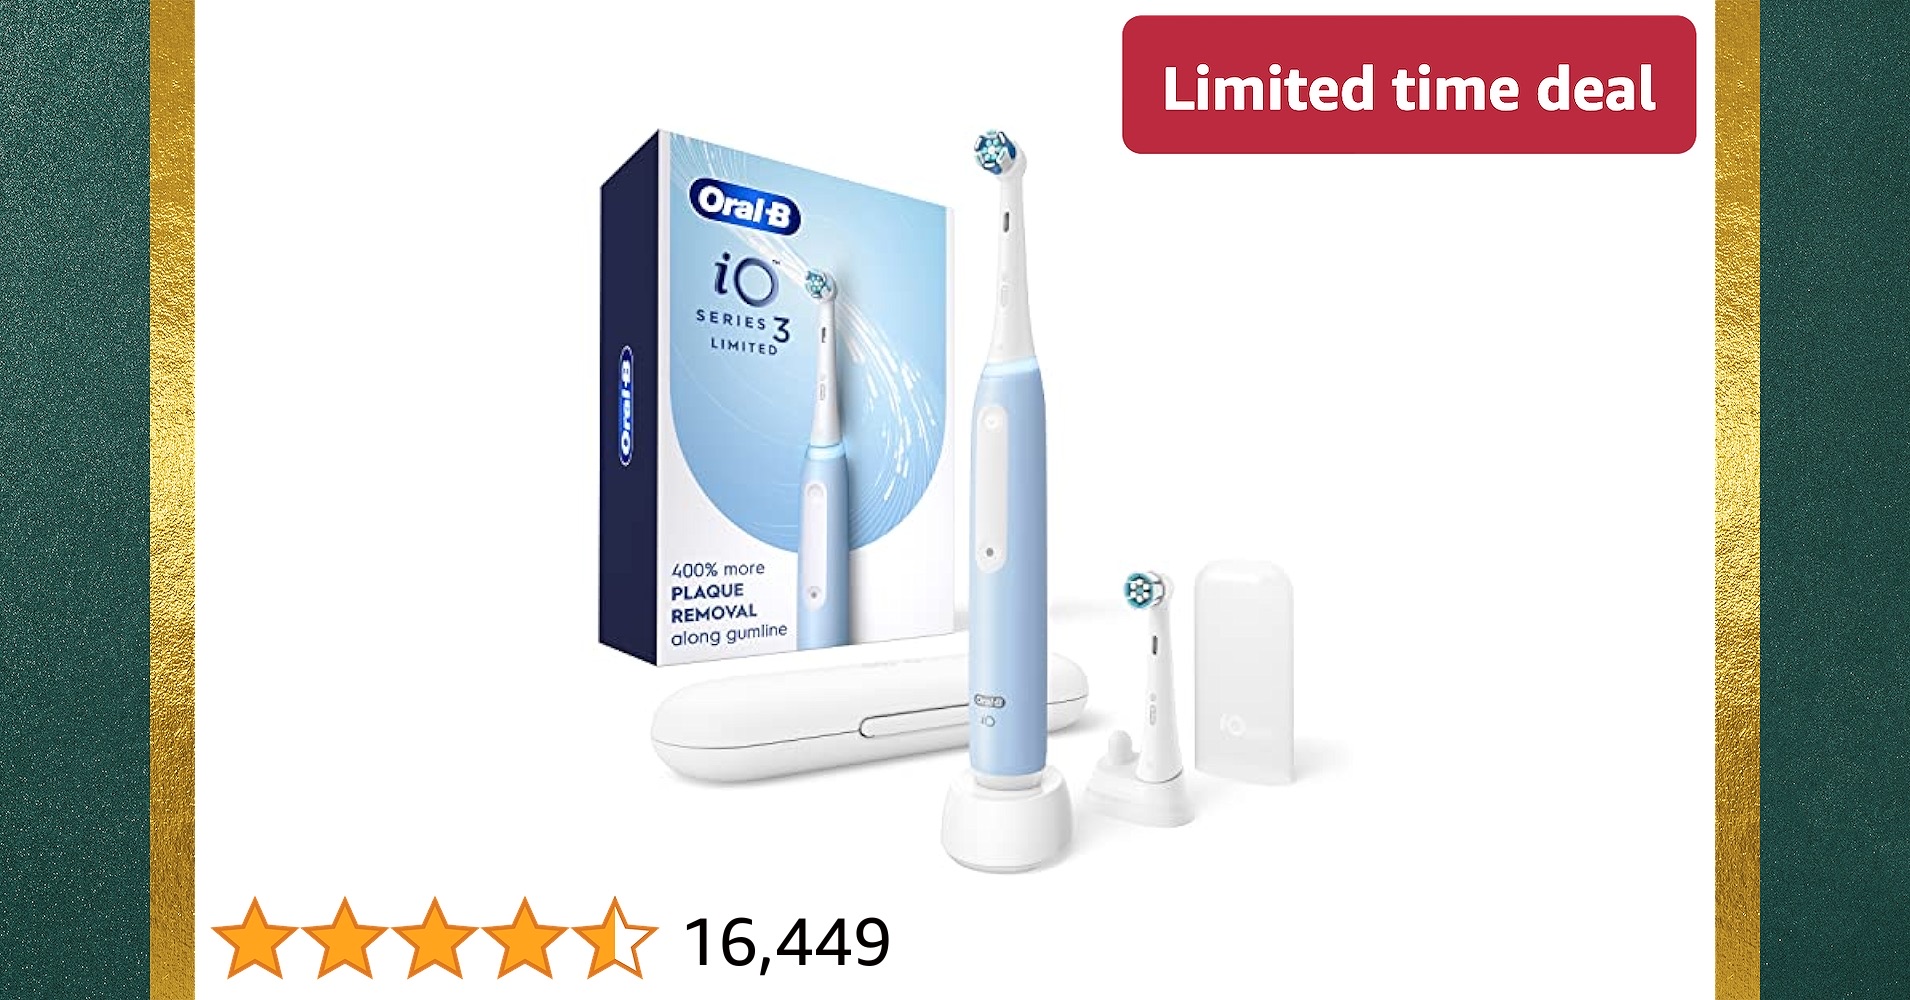 Limited-time deal: Oral-B iO Series 3 Limited Rechargeable Electric Powered Toothbrush, Blue with 2 Brush Heads and Travel Case - Visible Pressure Sensor to Protect Gums - 3 Modes - 2 Minute Timer